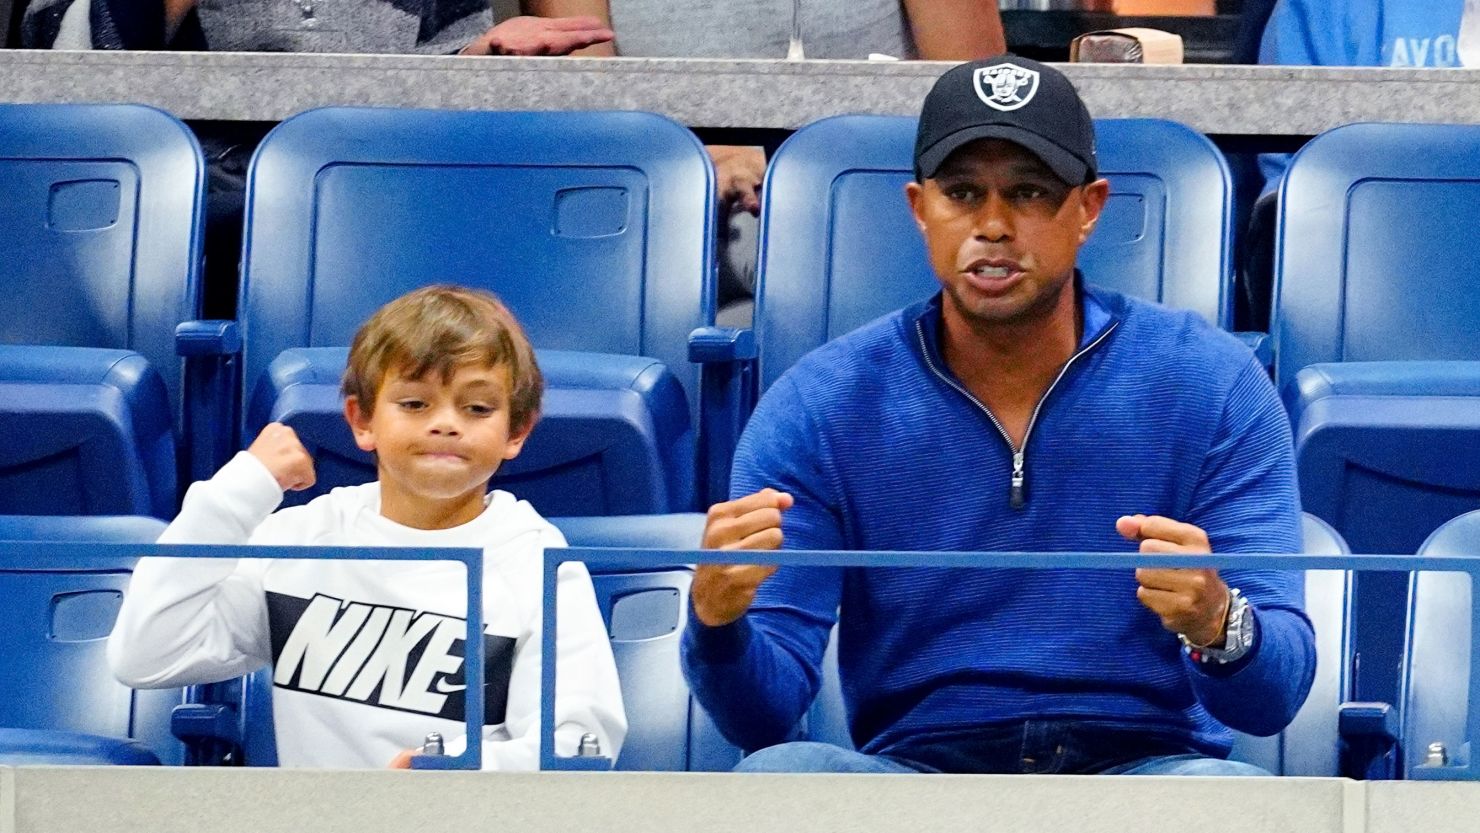 Tiger Woods and his son Charlie Axel Woods cheer on Rafael Nadal at the US Open in New York.